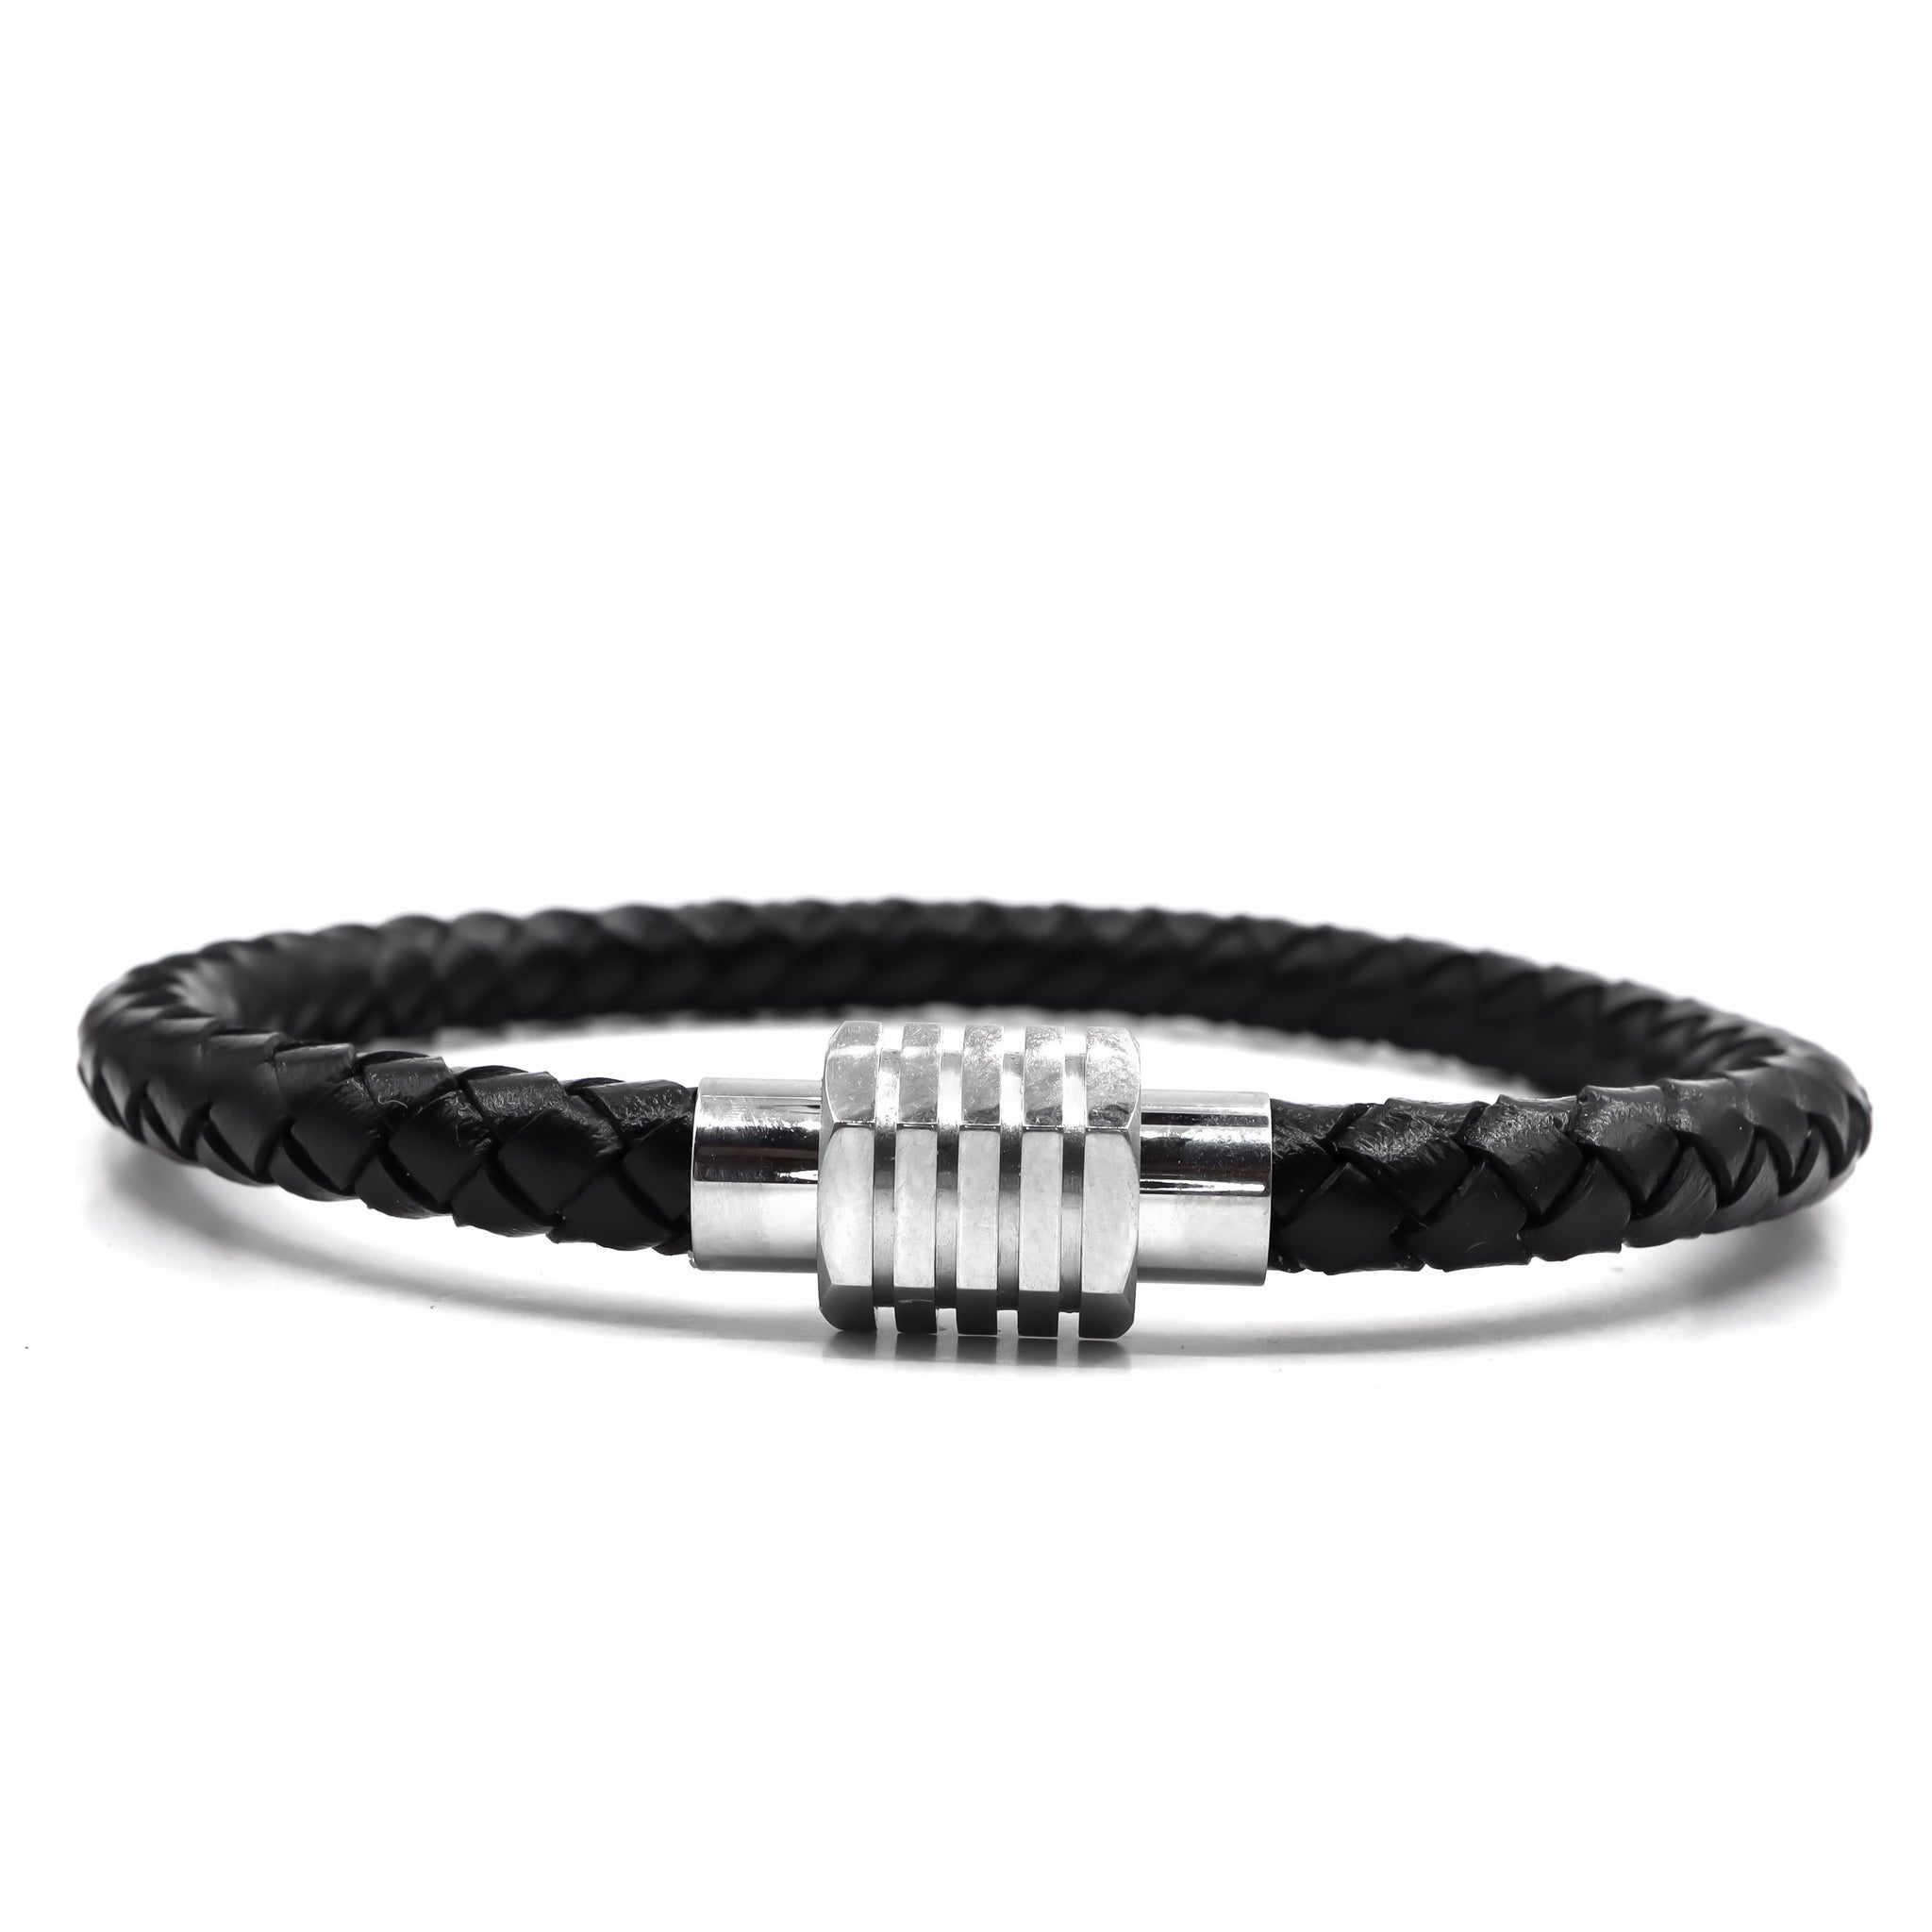 Black Leather and Silver Stainless Steel Men's Bracelet